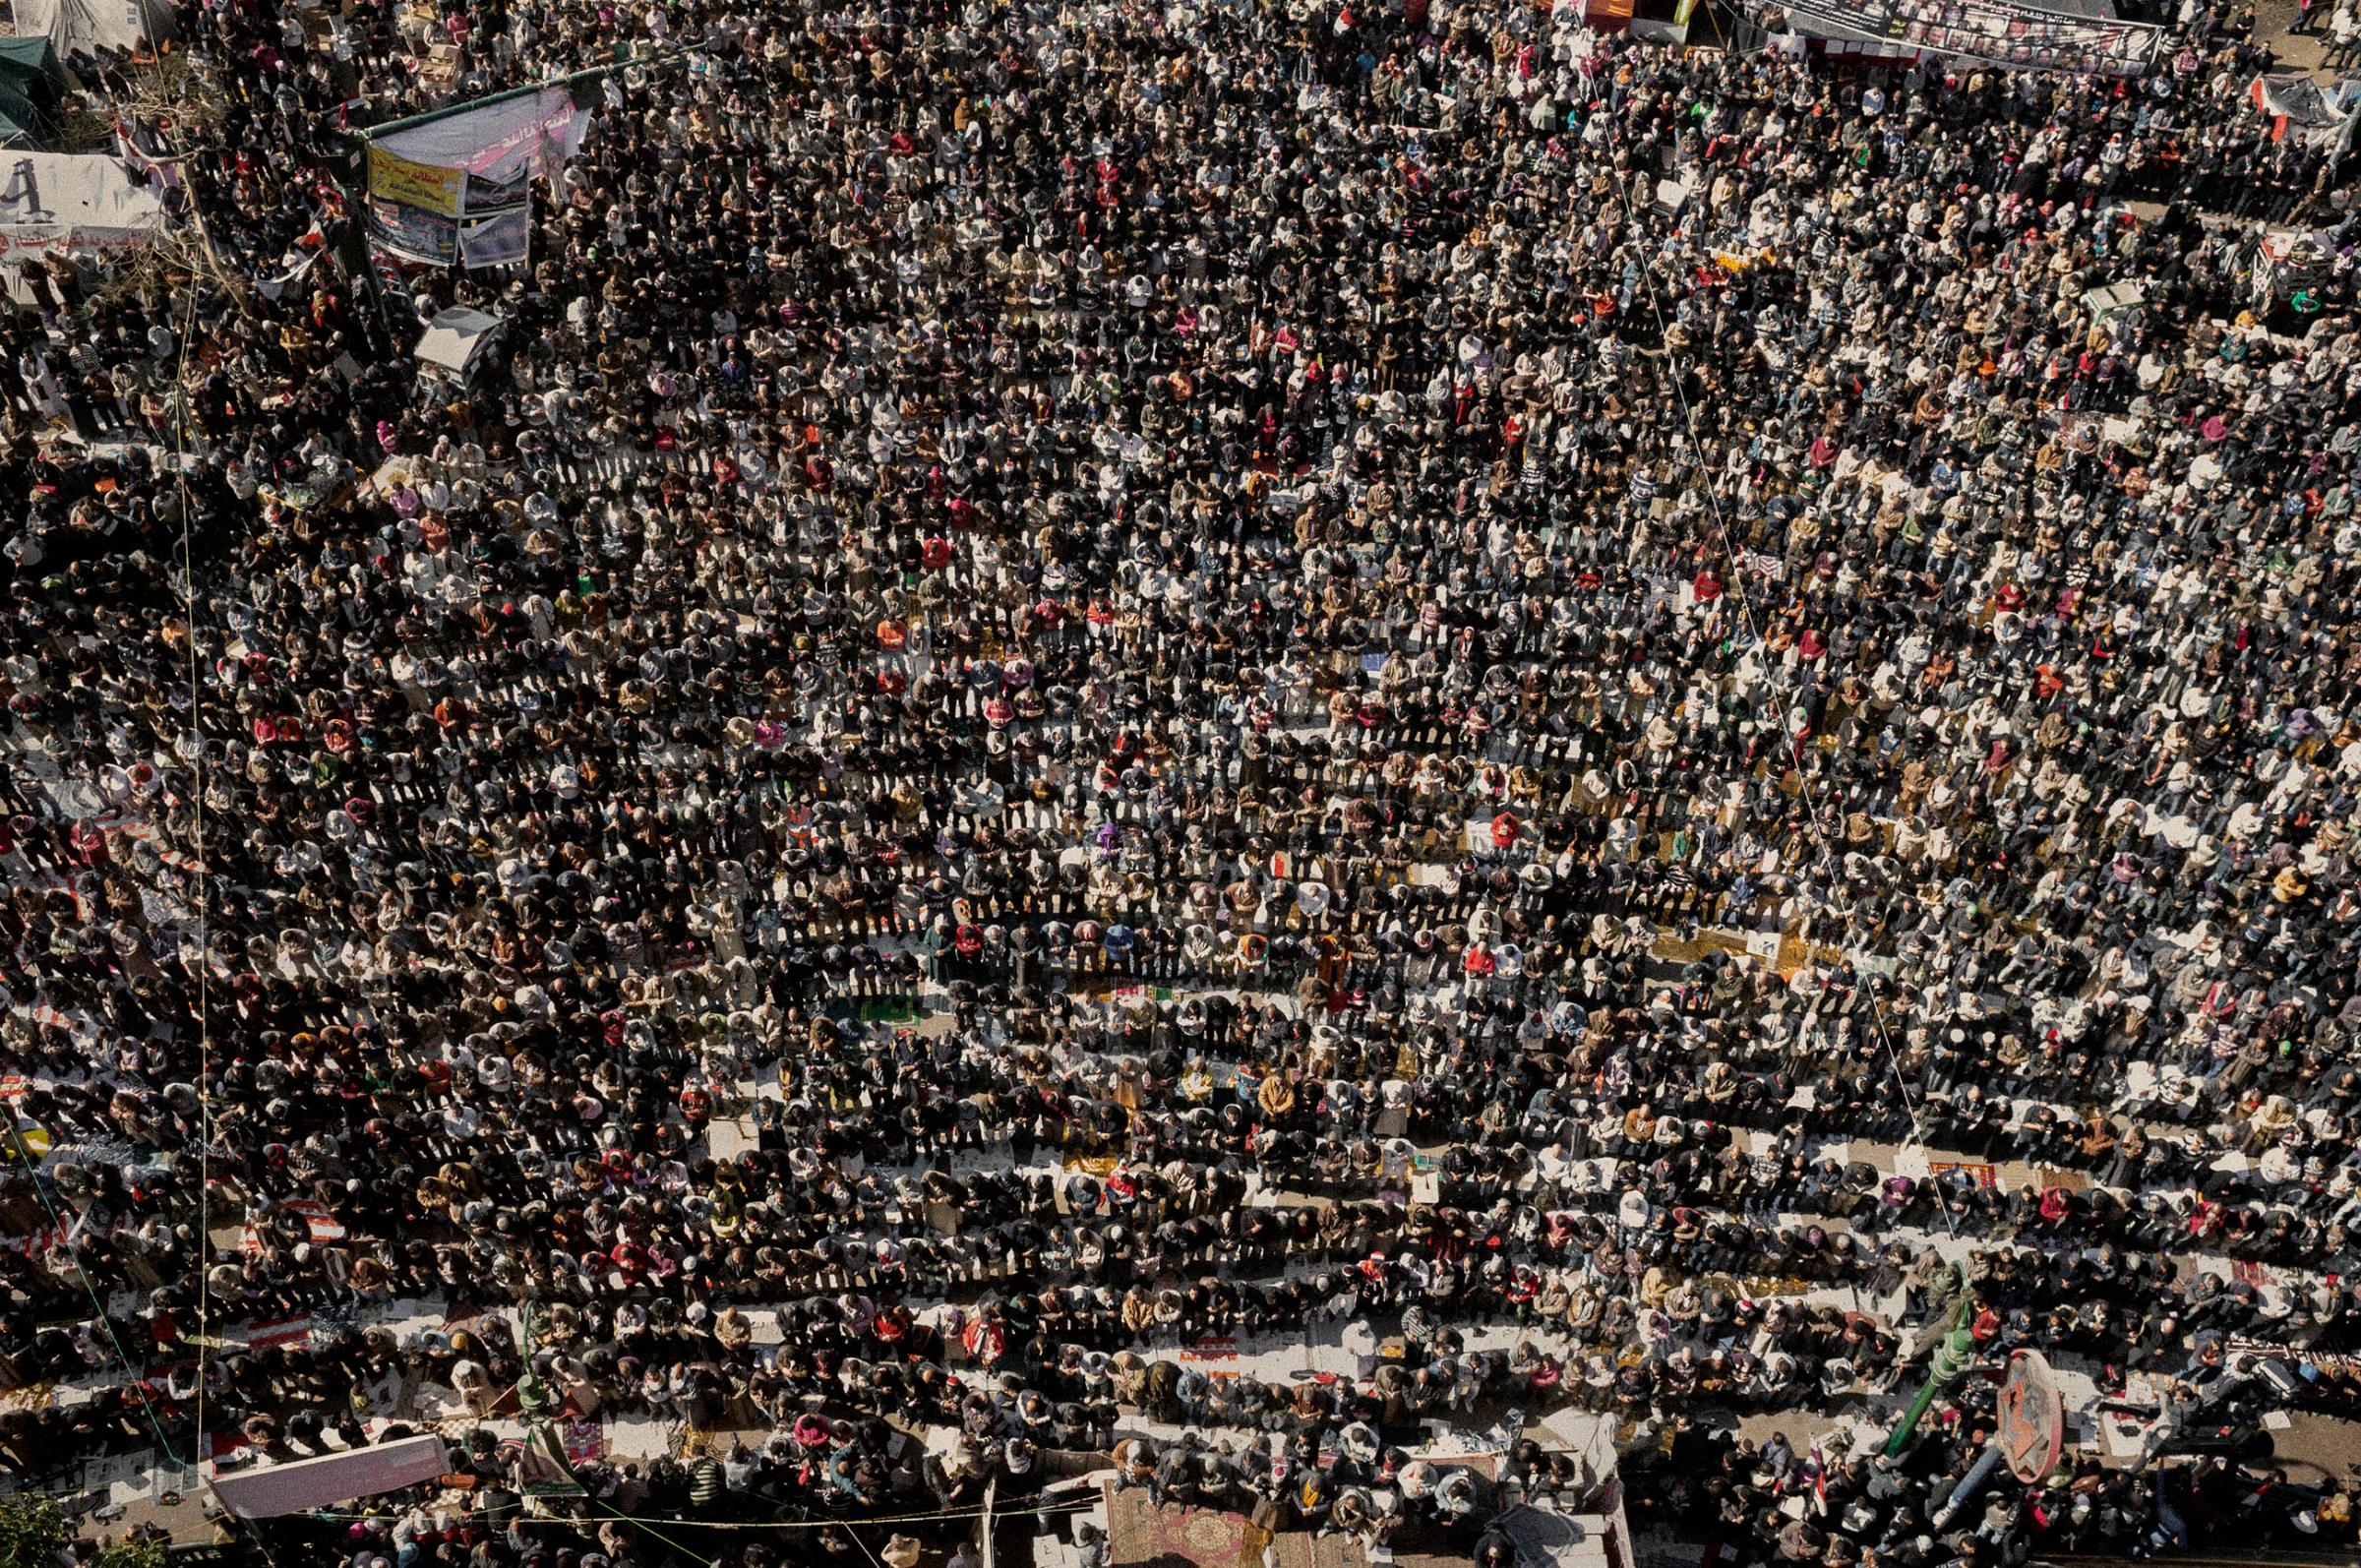 EGYPT. Cairo. January, 2012. Mass outdoor prayer duringthe first anniversary of theRevolution in Tahrir Square.